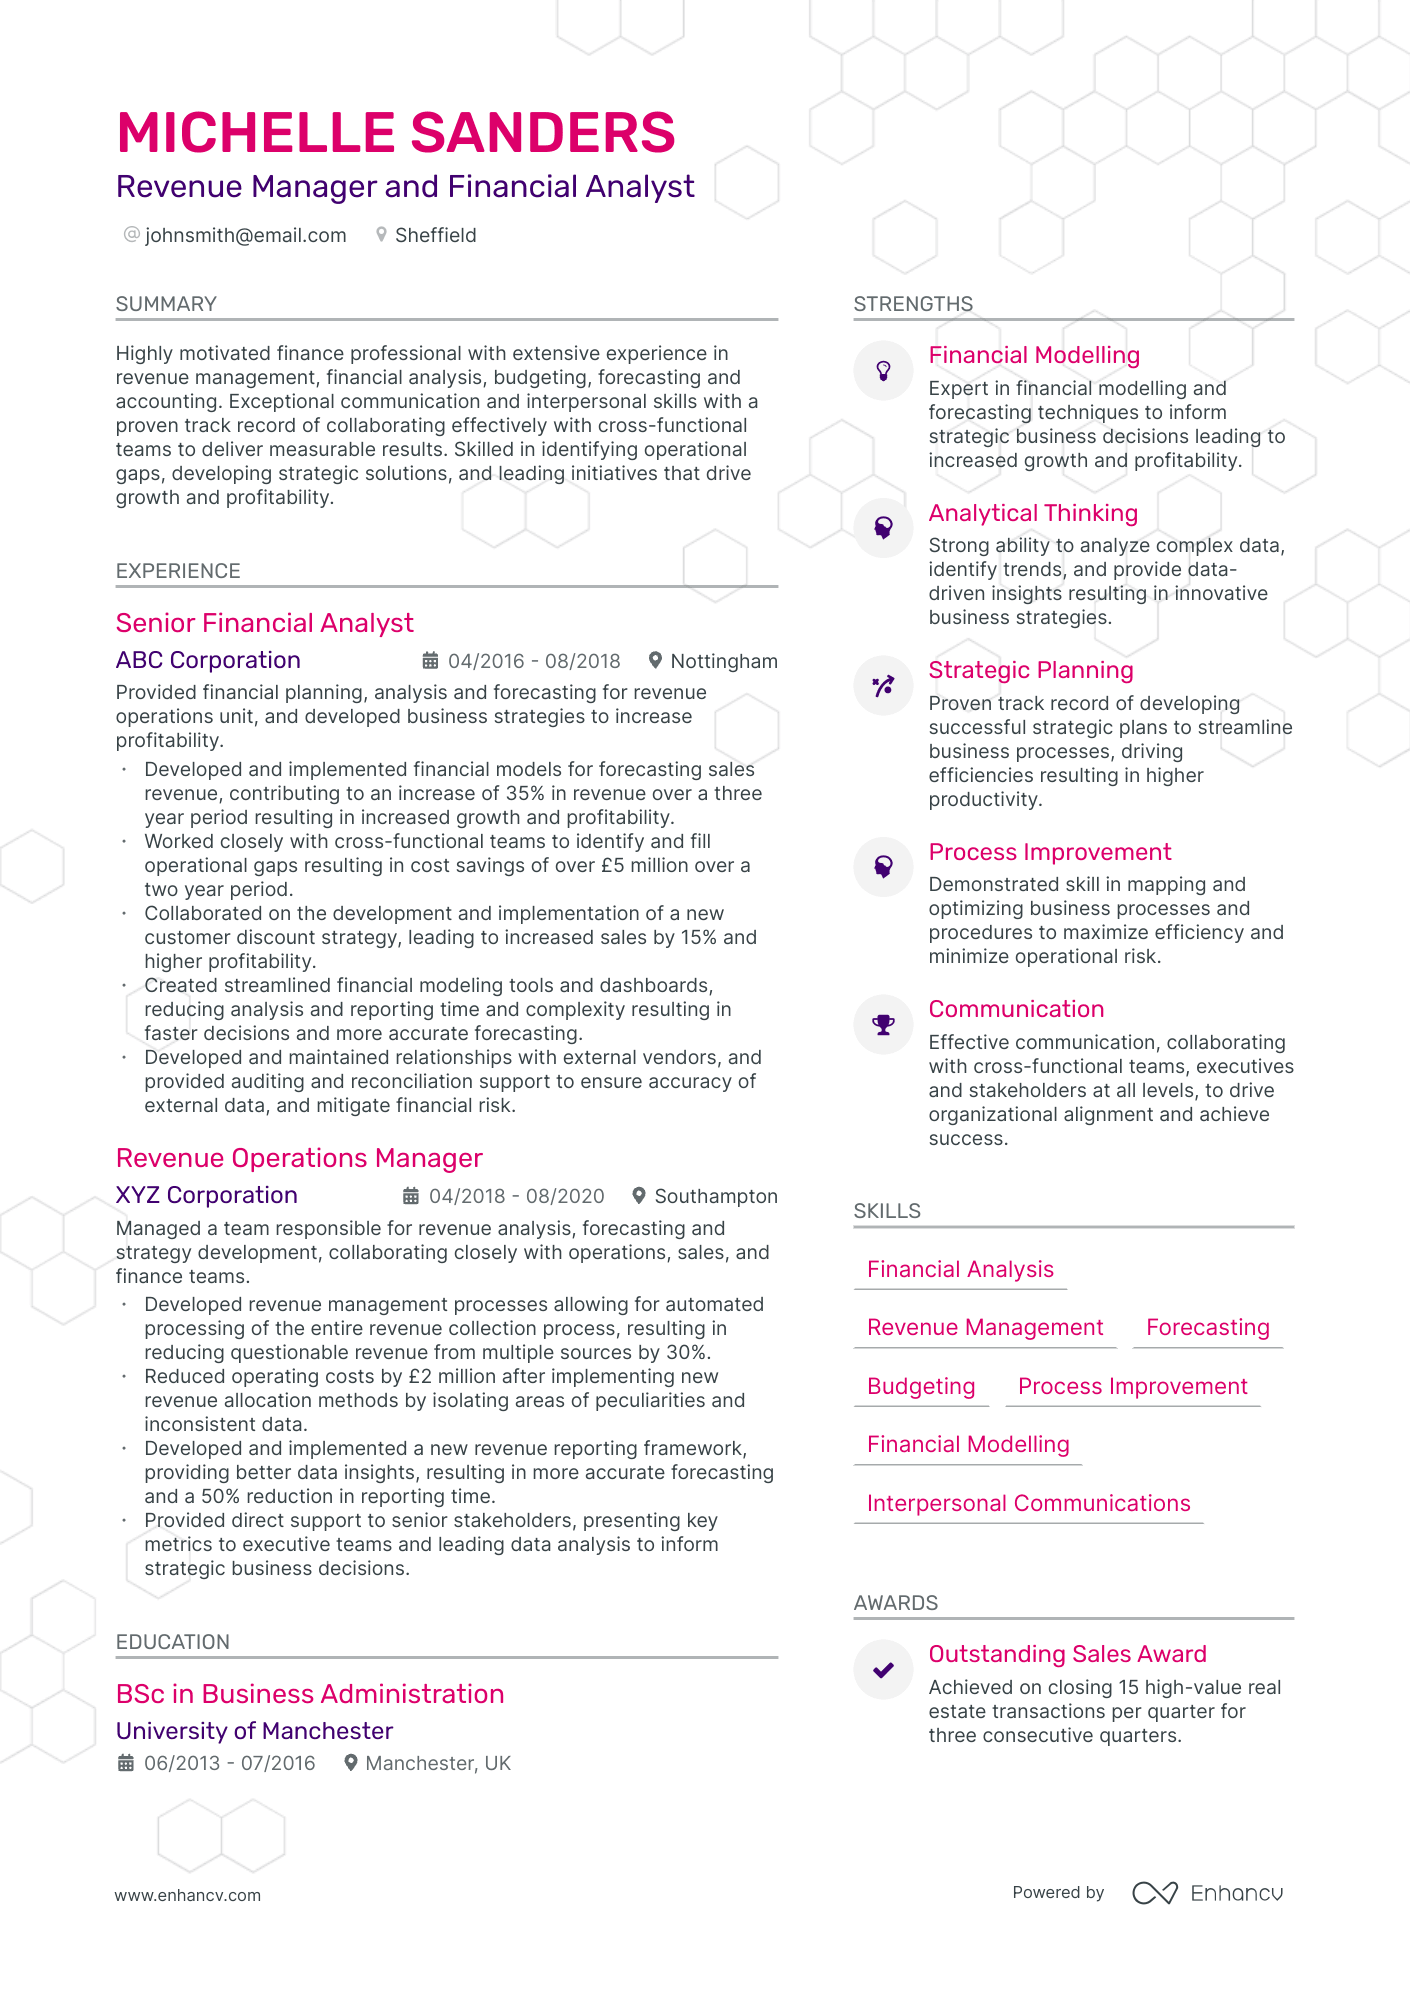 Revenue Manager and Financial Analyst CV example